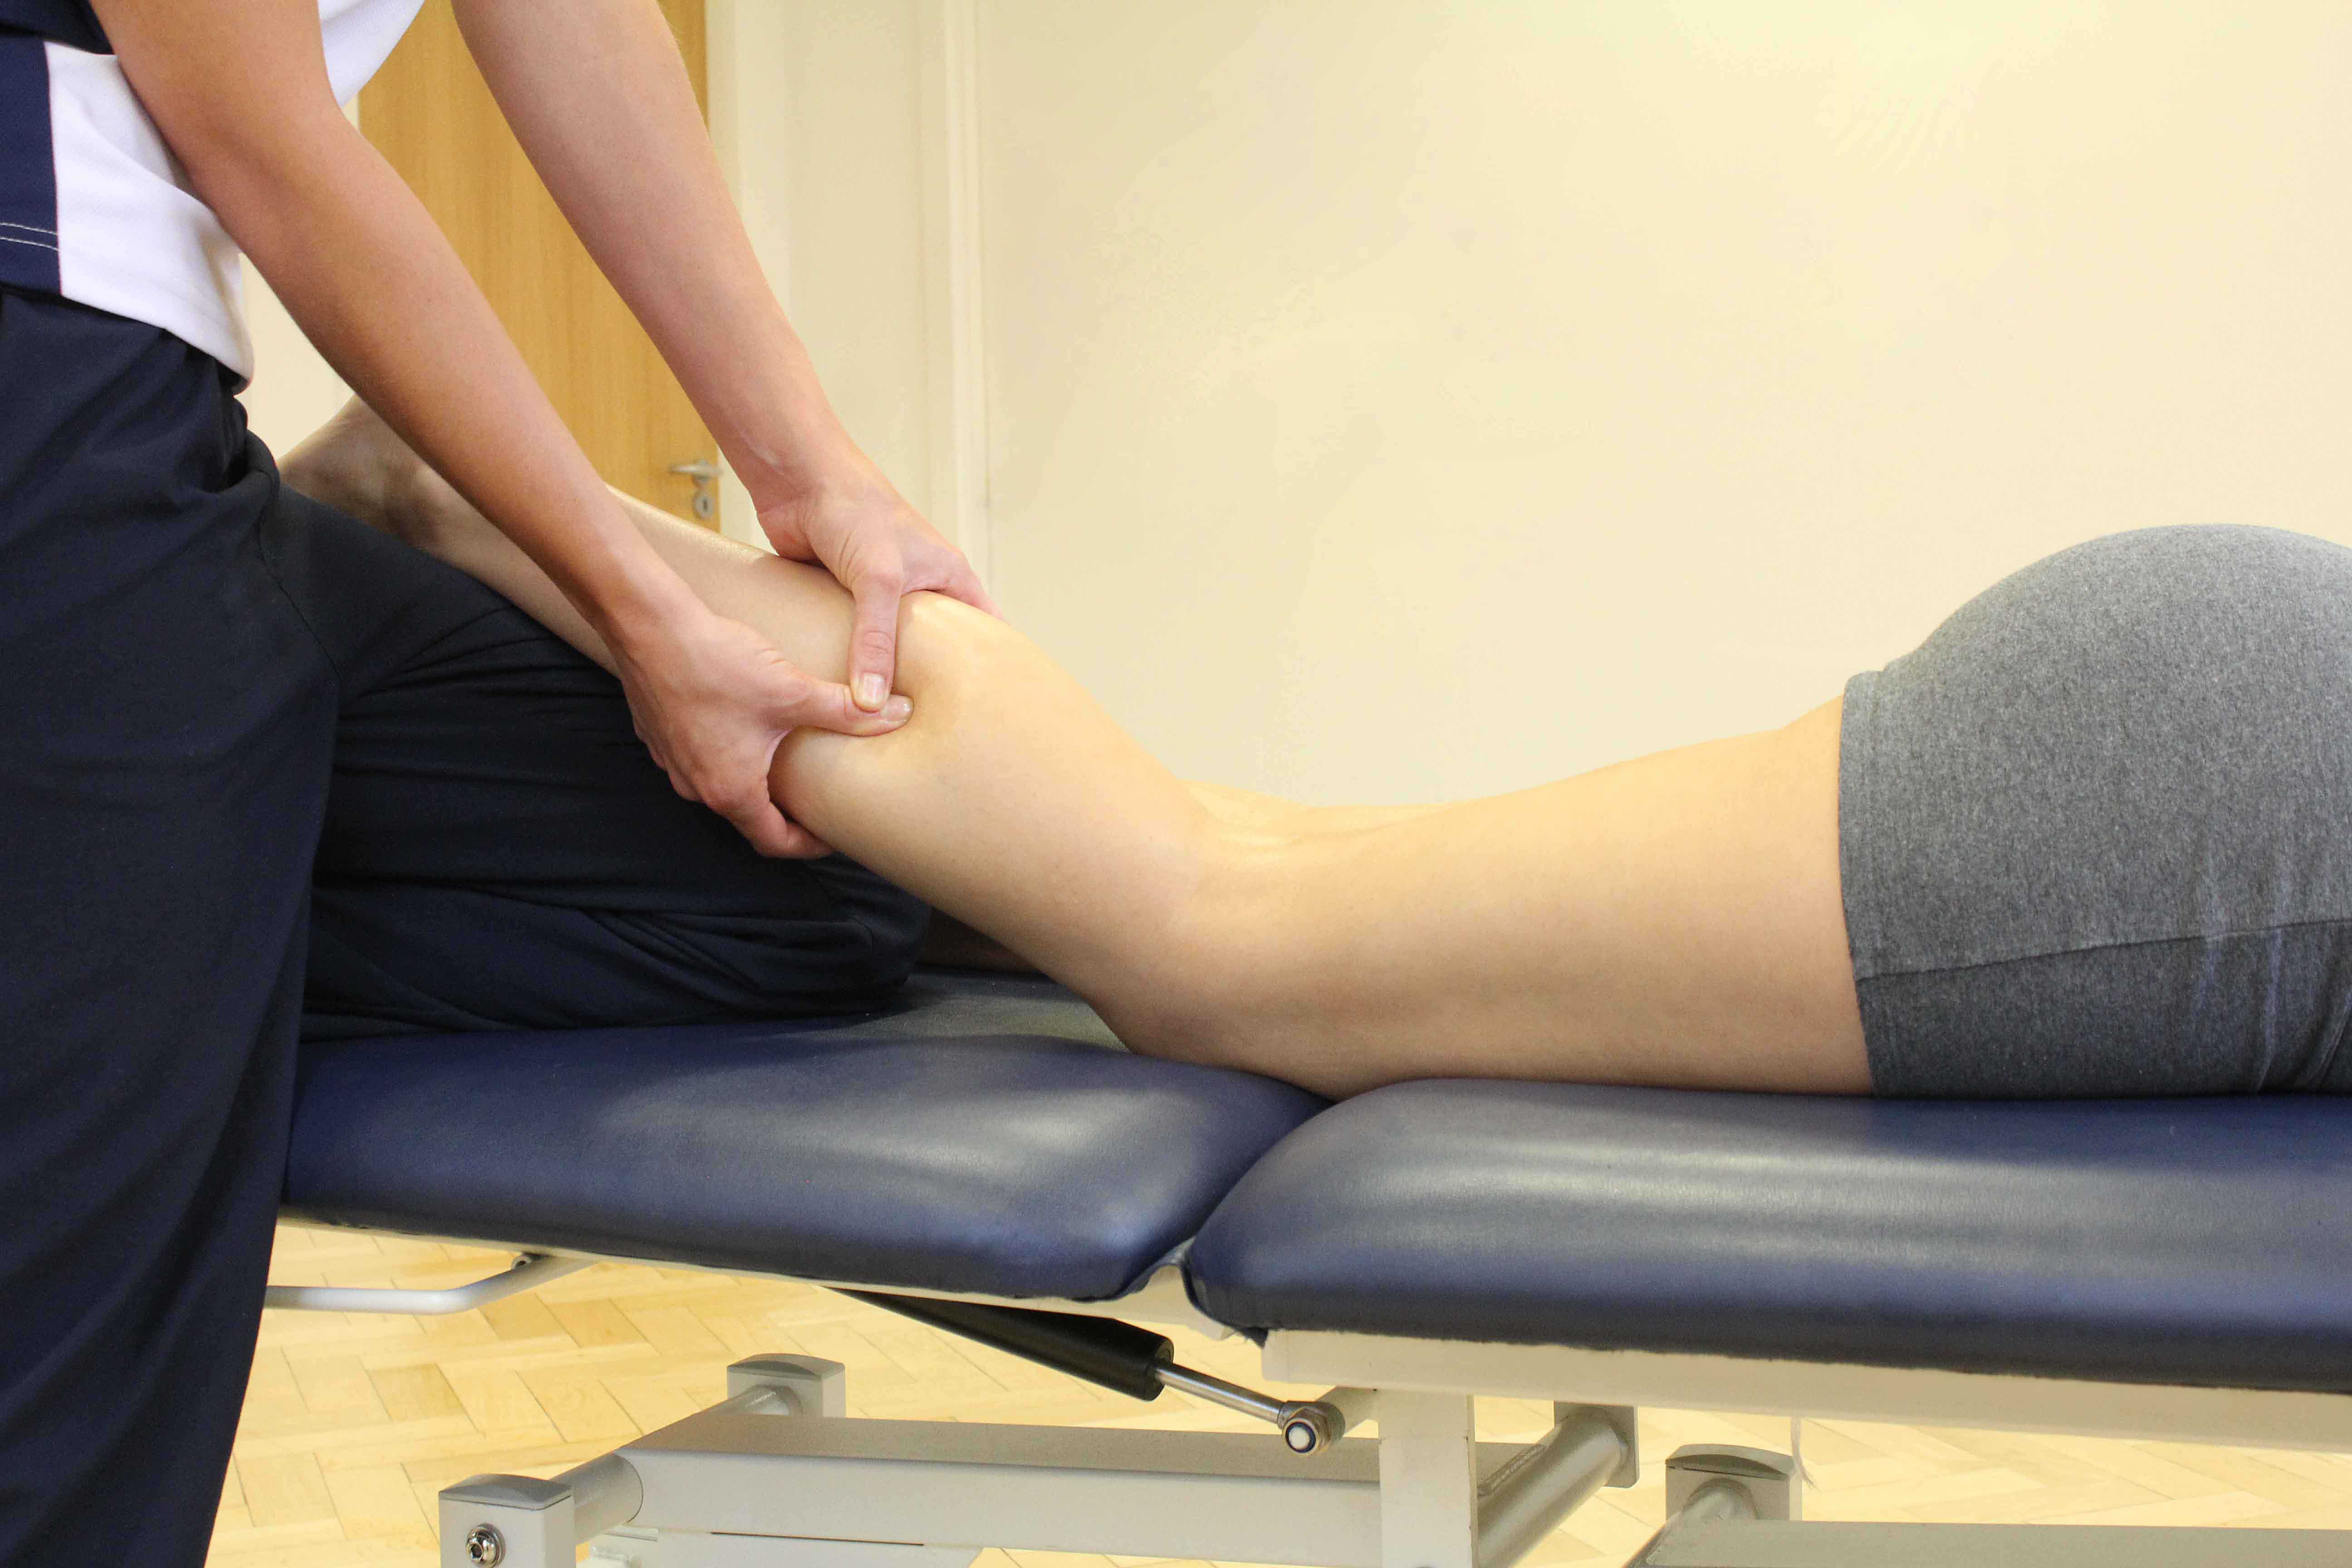 Trigger point massage of the gastrocnemius muscle by an experienced physiotherapist